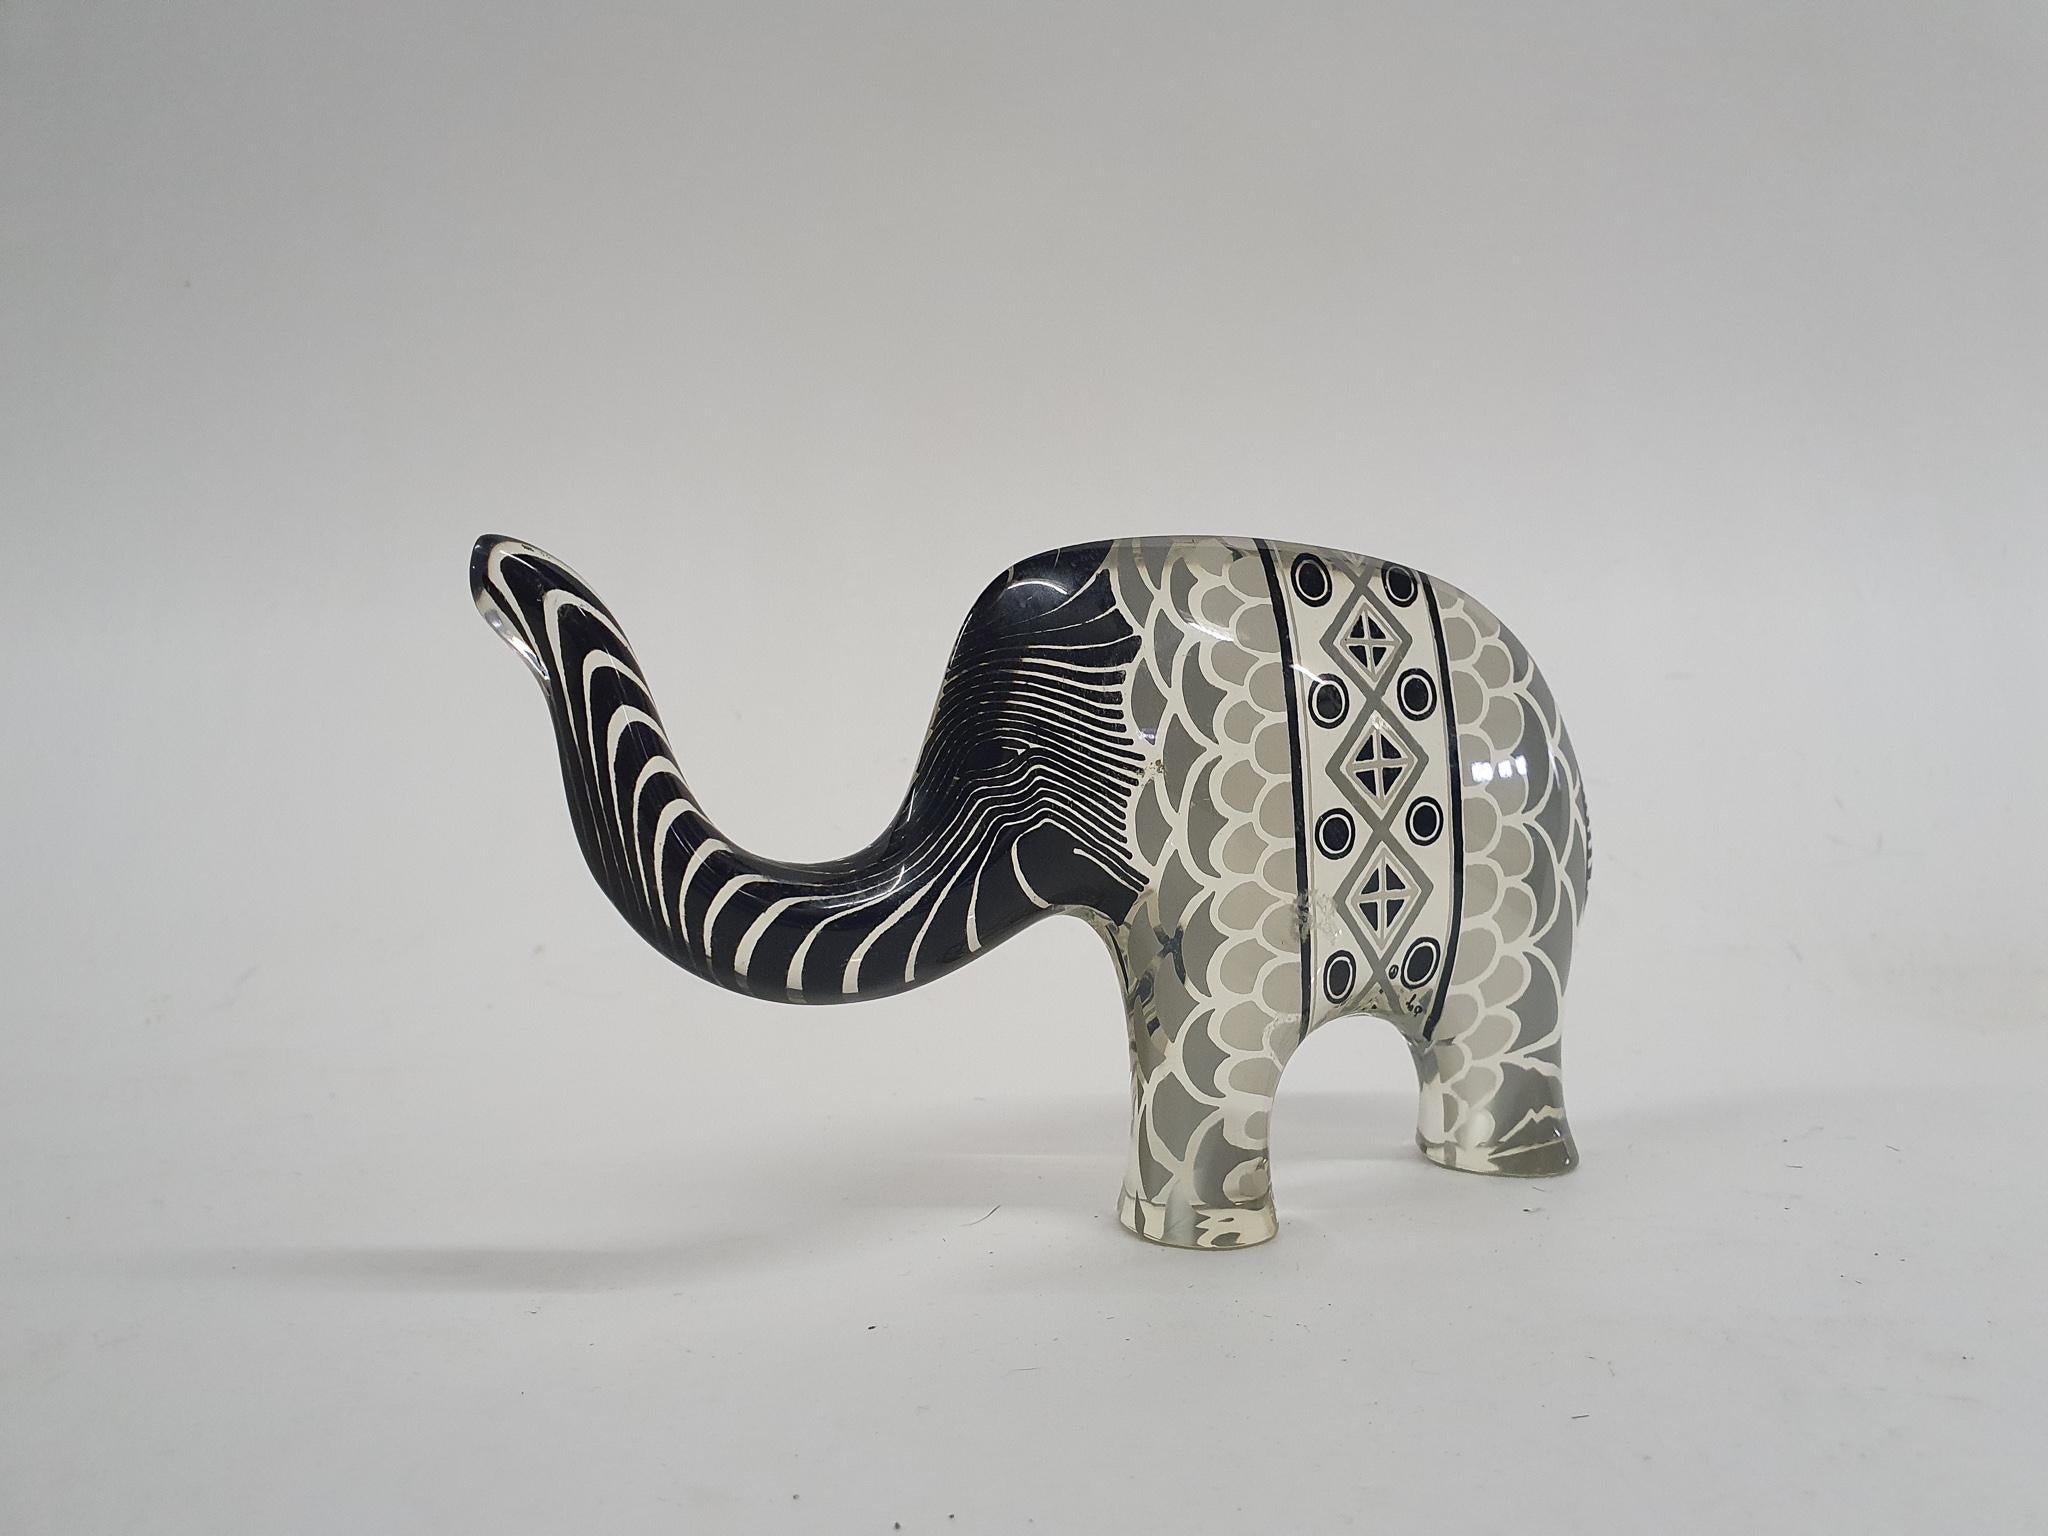 Abraham Palatnik glass elephant, Brazil, 1970s.

lucite glass elephant by the artist Abraham Paltanik.
A real collectors item in good condition. 
Marked in the glass.